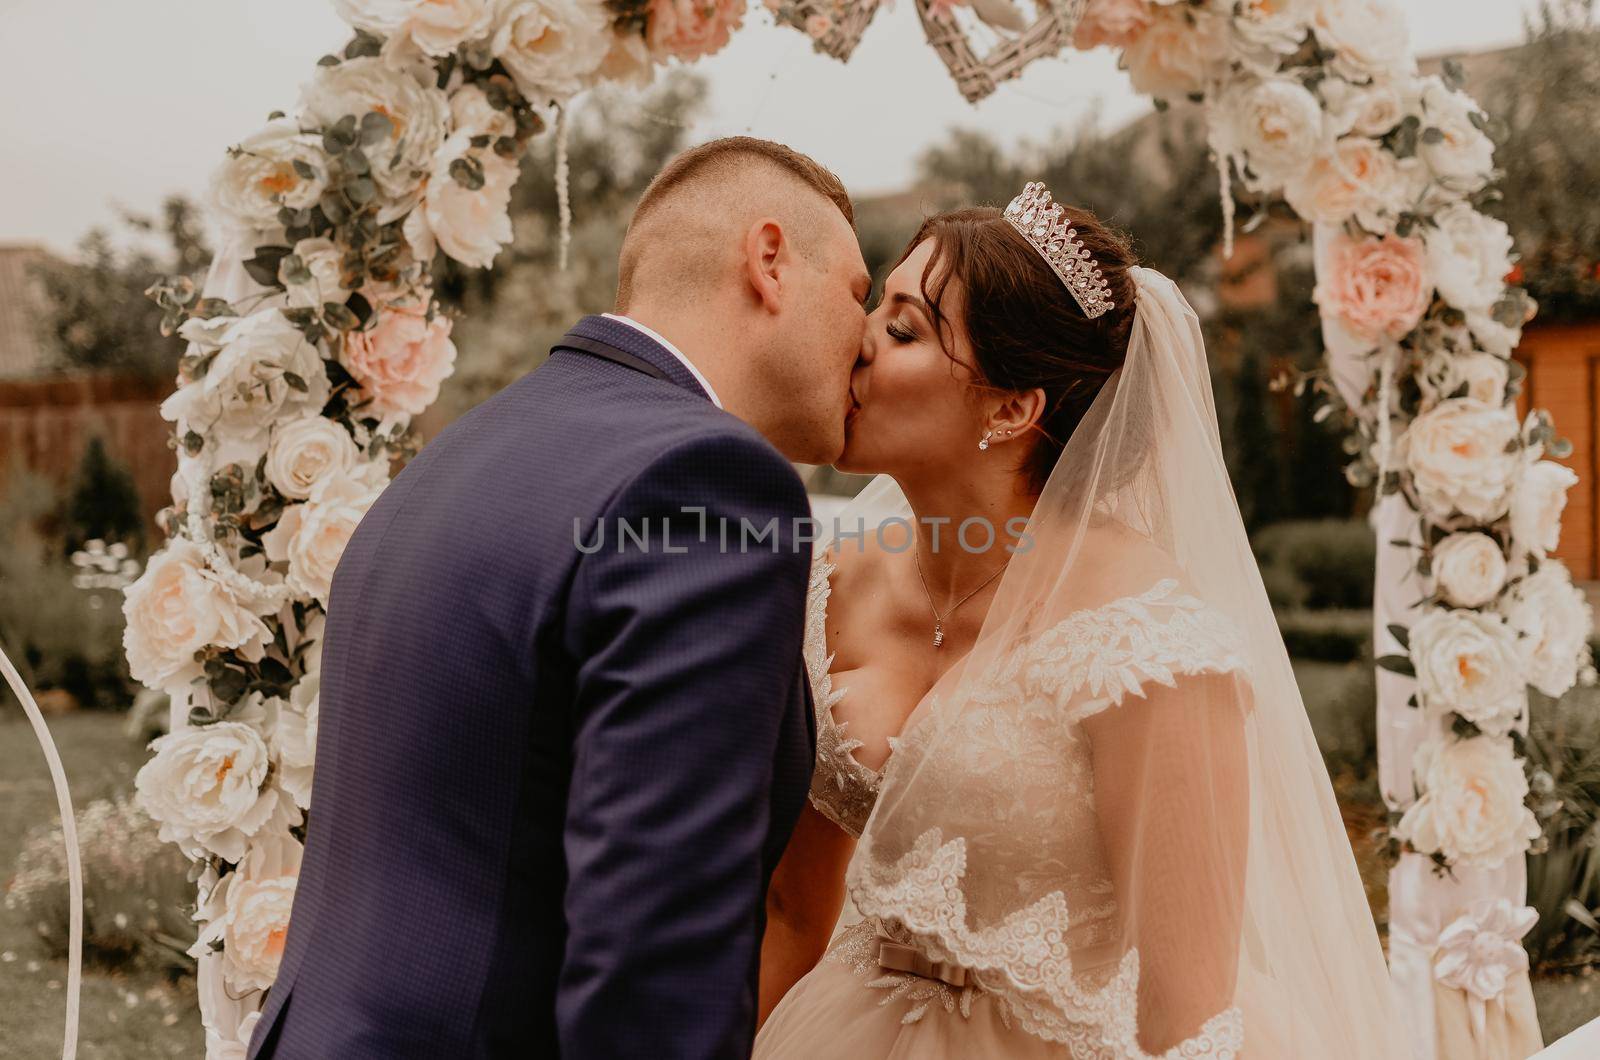 Bride and groom in a wedding dress and a long veil at a wedding ceremony on the background of a flower arch laughing kissing rejoicing. Slavic Ukrainian Russian traditions